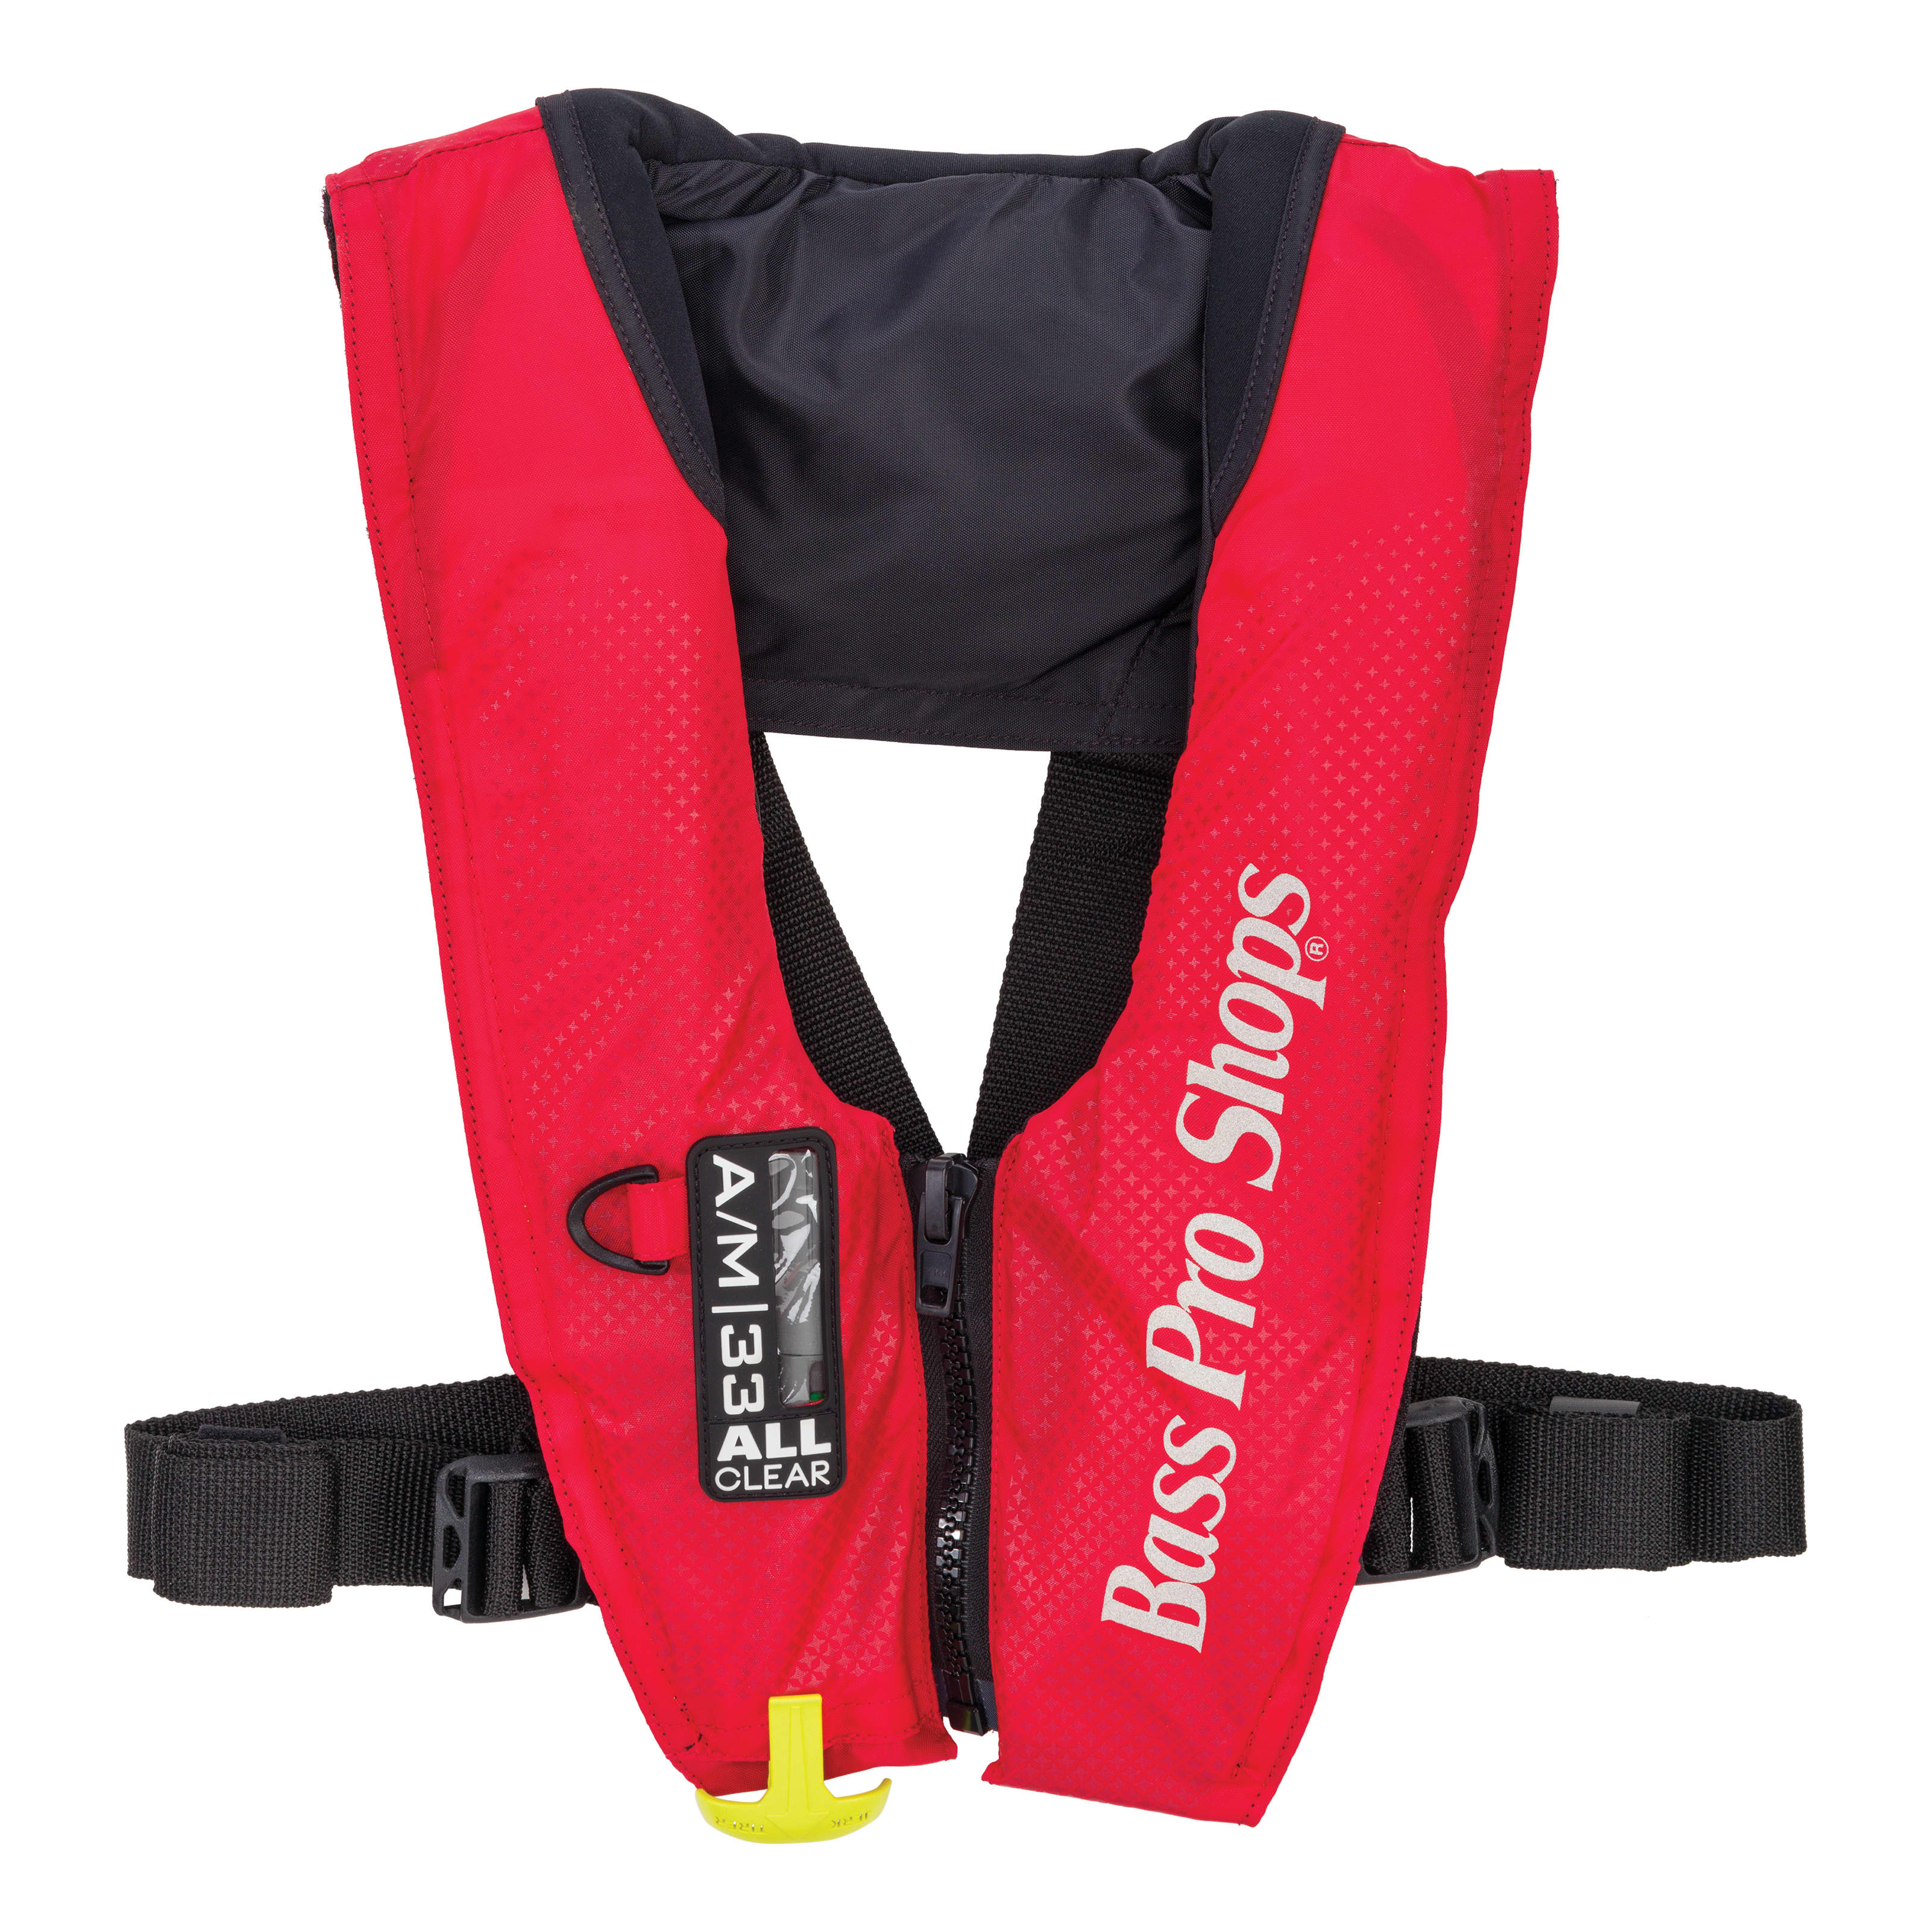 Bass Pro Shops® AM 33 All-Clear™ Auto/Manual-Inflatable Life Vest - Red